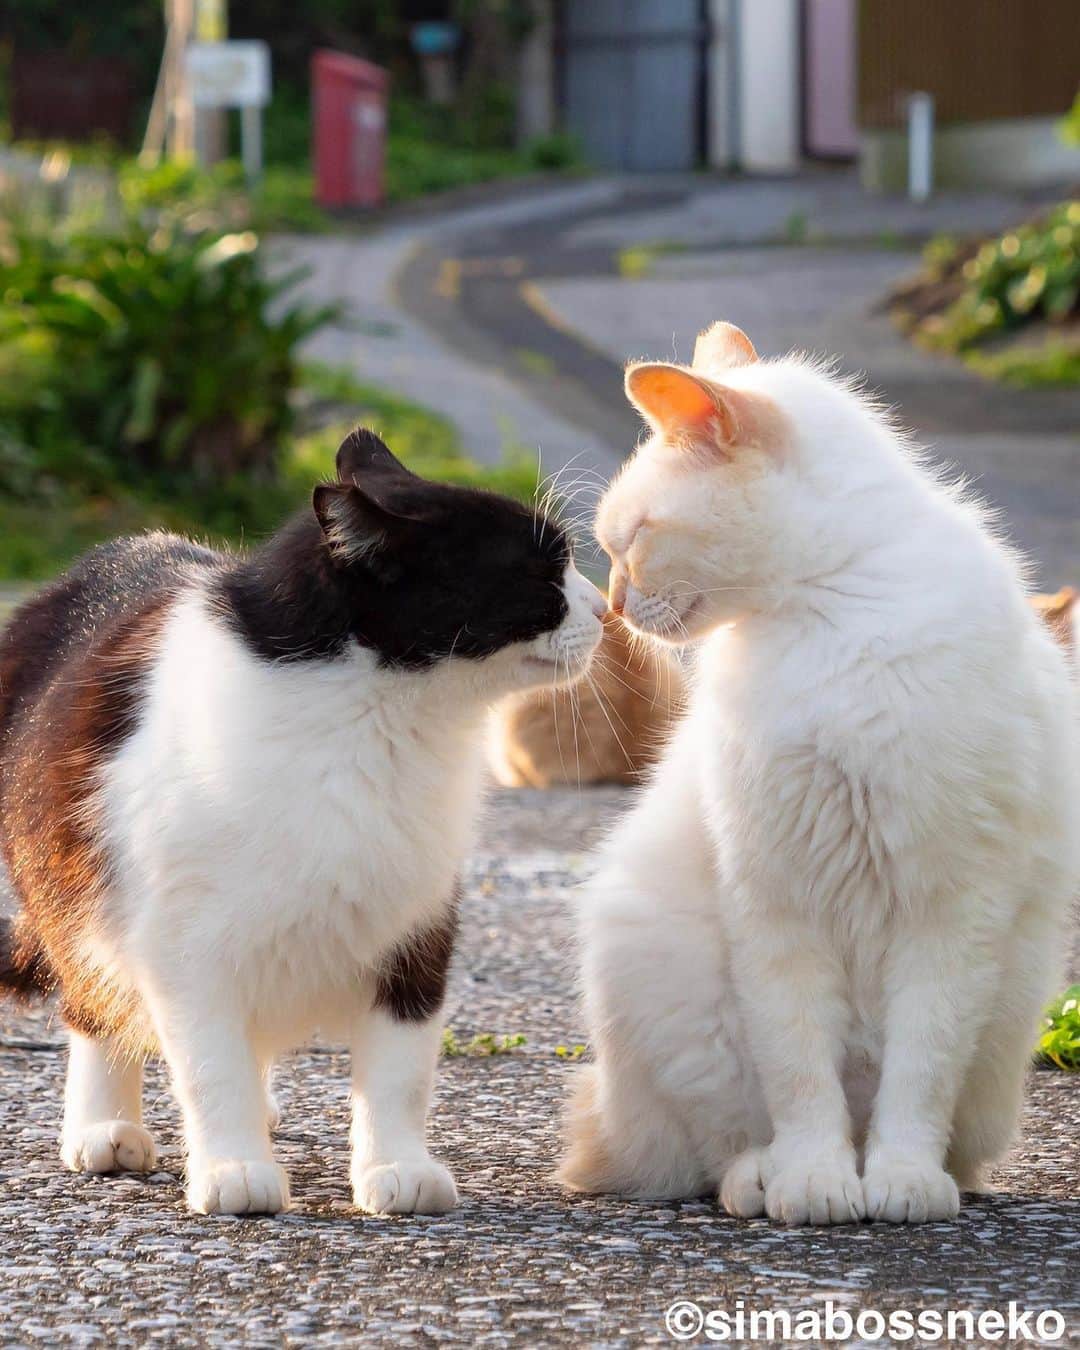 simabossnekoさんのインスタグラム写真 - (simabossnekoInstagram)「・ なかよしkiss😽😸💓 Morning kiss✨  5枚目の投稿は動画です。 The 5th post is video. Swipeしてね←←←🐾  ・ 〜お知らせ〜 只今、人気の写真を厳選したクリアファイルを5種類、simabossneko's shopにて販売中です。  お得なセットも❣️ さち3枚セットに、さち3枚＋島猫2枚の5枚セットも販売中✨  ◎販売はminneと、メルカリShops内「simabossneko's shop」にて  各ショップへは、@simabossneko または @p_nyanco22 のプロフィールリンクからご覧いただけます。  🔍メルカリは、アプリ立ち上げ後「simabossneko's shop」で検索してみてください。  👉ストーリーハイライトにも、ショップへのリンク(minne)があります。そちらも是非ご覧ください。  ※8/29現在、ご購入いただきました作品の発送は、9/1以降を予定しております。何卒ご了承くださいませ。 ・ ・ 〜Notice〜 Island cats A4 file folders are available!✨  The file folders are carefully selected from 5 popular photos.  We also sell a great set ❣️ Sachi 3-piece set, 5-piece set of 3 Sachi + 2 island cats are also available✨  The  A4 size file folders are sold at minne "simabossneko's shop“  ●Shop URL https://minne.com/＠simabossneko  🇺🇸🇰🇷🇹🇼 It is possible to purchase and ship from Taiwan, Hong Kong, the USA, Korea, etc.  🇫🇷🇬🇧🇩🇪 It is now possible to ship and purchase the works to Europe!! France, UK, Germany etc.  ※ Shipping fee will be charged separately.  You can reach the shop from the profile link of @simabossneko or @p_nyanco22   And, Story highlights also have a link to the shop. Please take a look there too. ・ ・ #クリアファイル #しまねこ #島猫 #ねこ #にゃんすたぐらむ #猫写真 #cats_of_world #catloversclub #pleasantcats #catstagram #meowed #ig_japan #lumixg9」8月29日 7時32分 - simabossneko